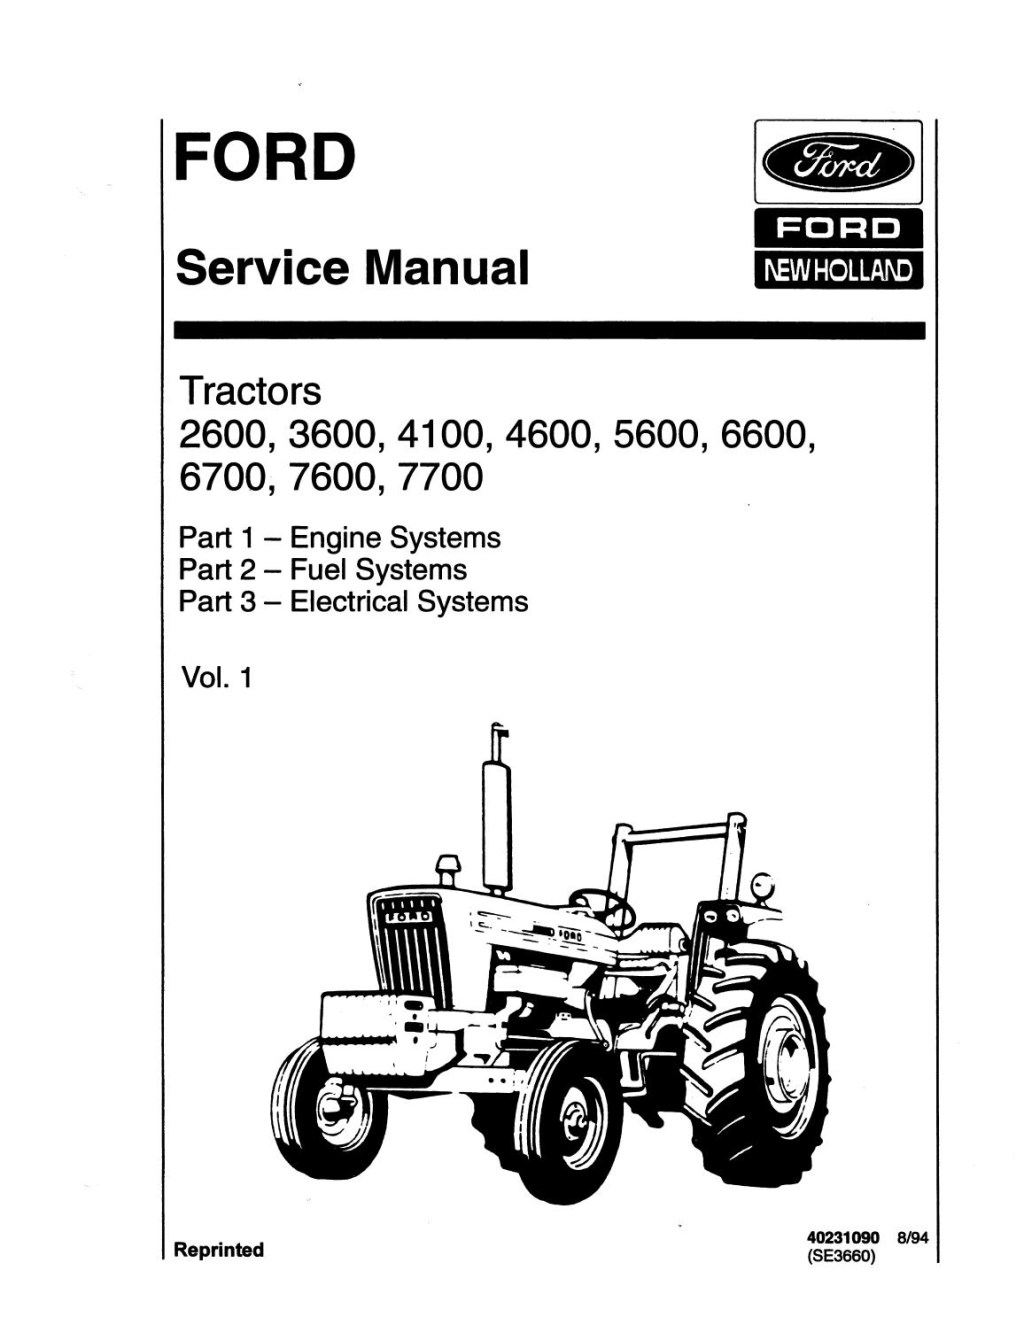 Picture of: Ford  Tractor Service Repair Manual by zhangtouzhao – Issuu